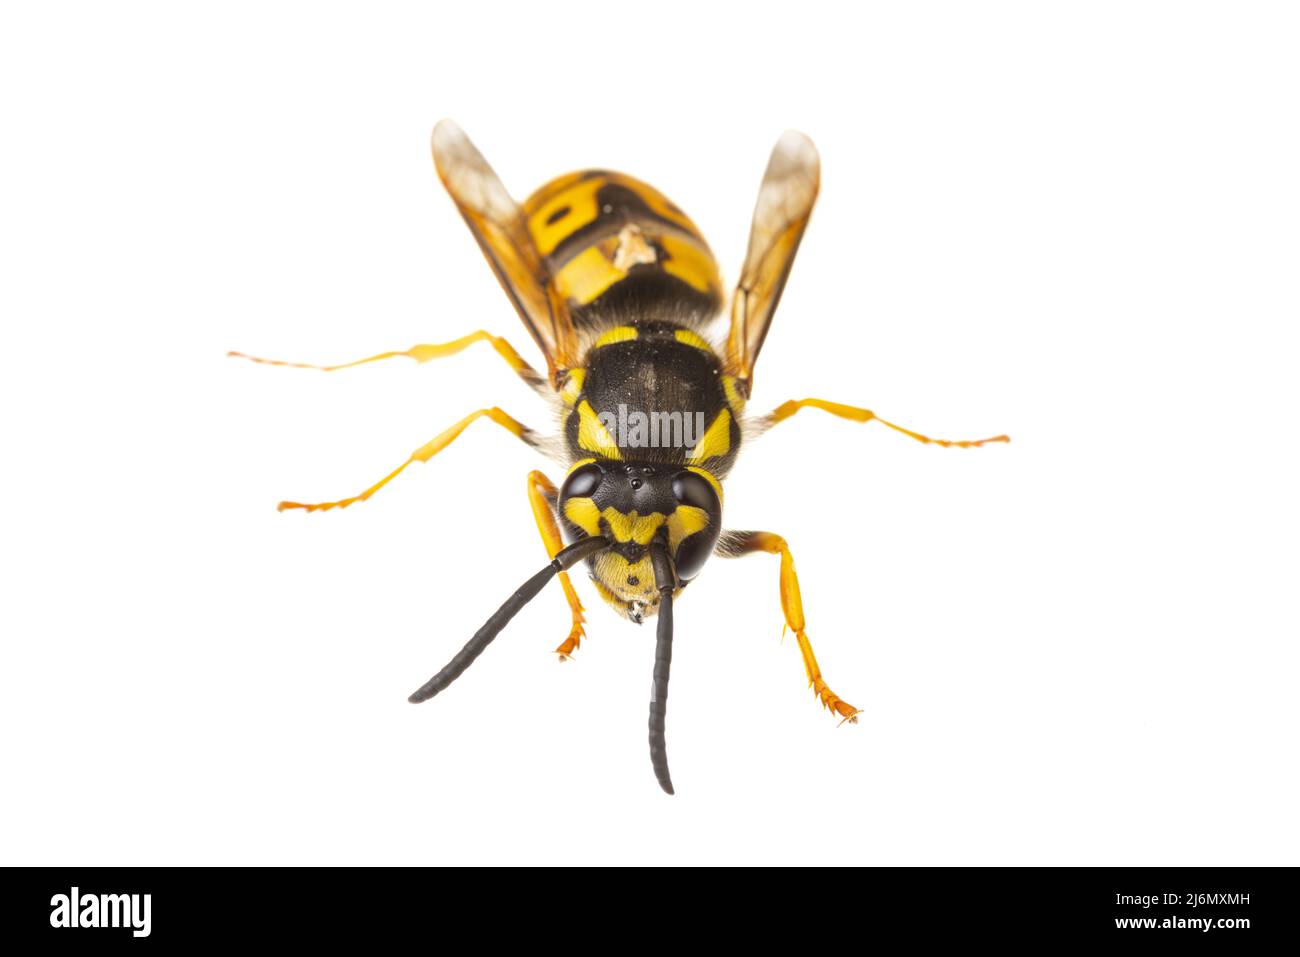 insects of europe - wasps: macro of Vespula germanica  german wasp european wasp  isolated on white background Stock Photo